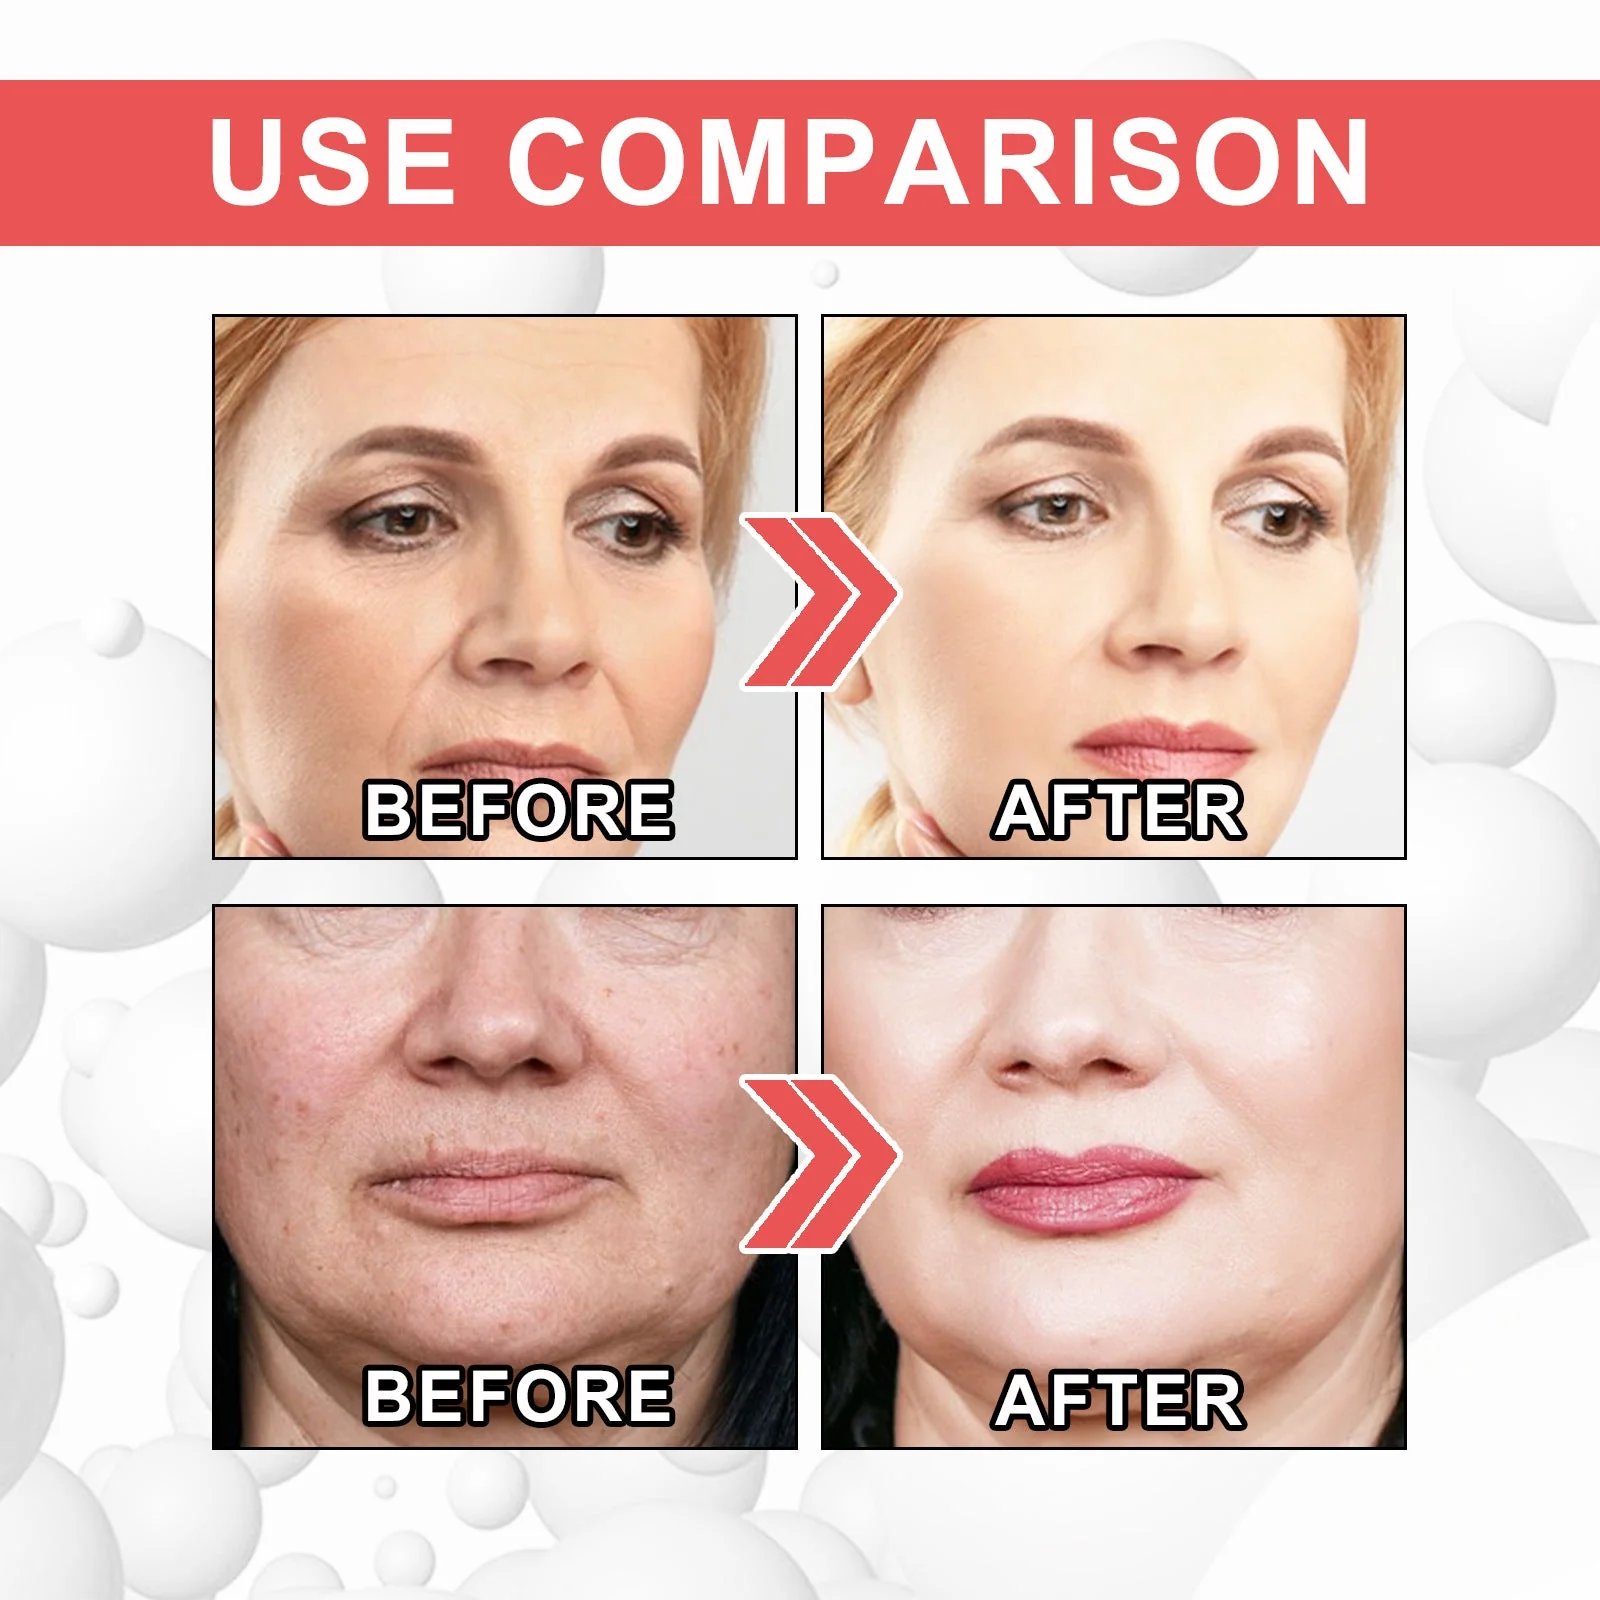 Last Day Promotion 49% OFF--2023 New Collagen Boost Anti-Aging Serum